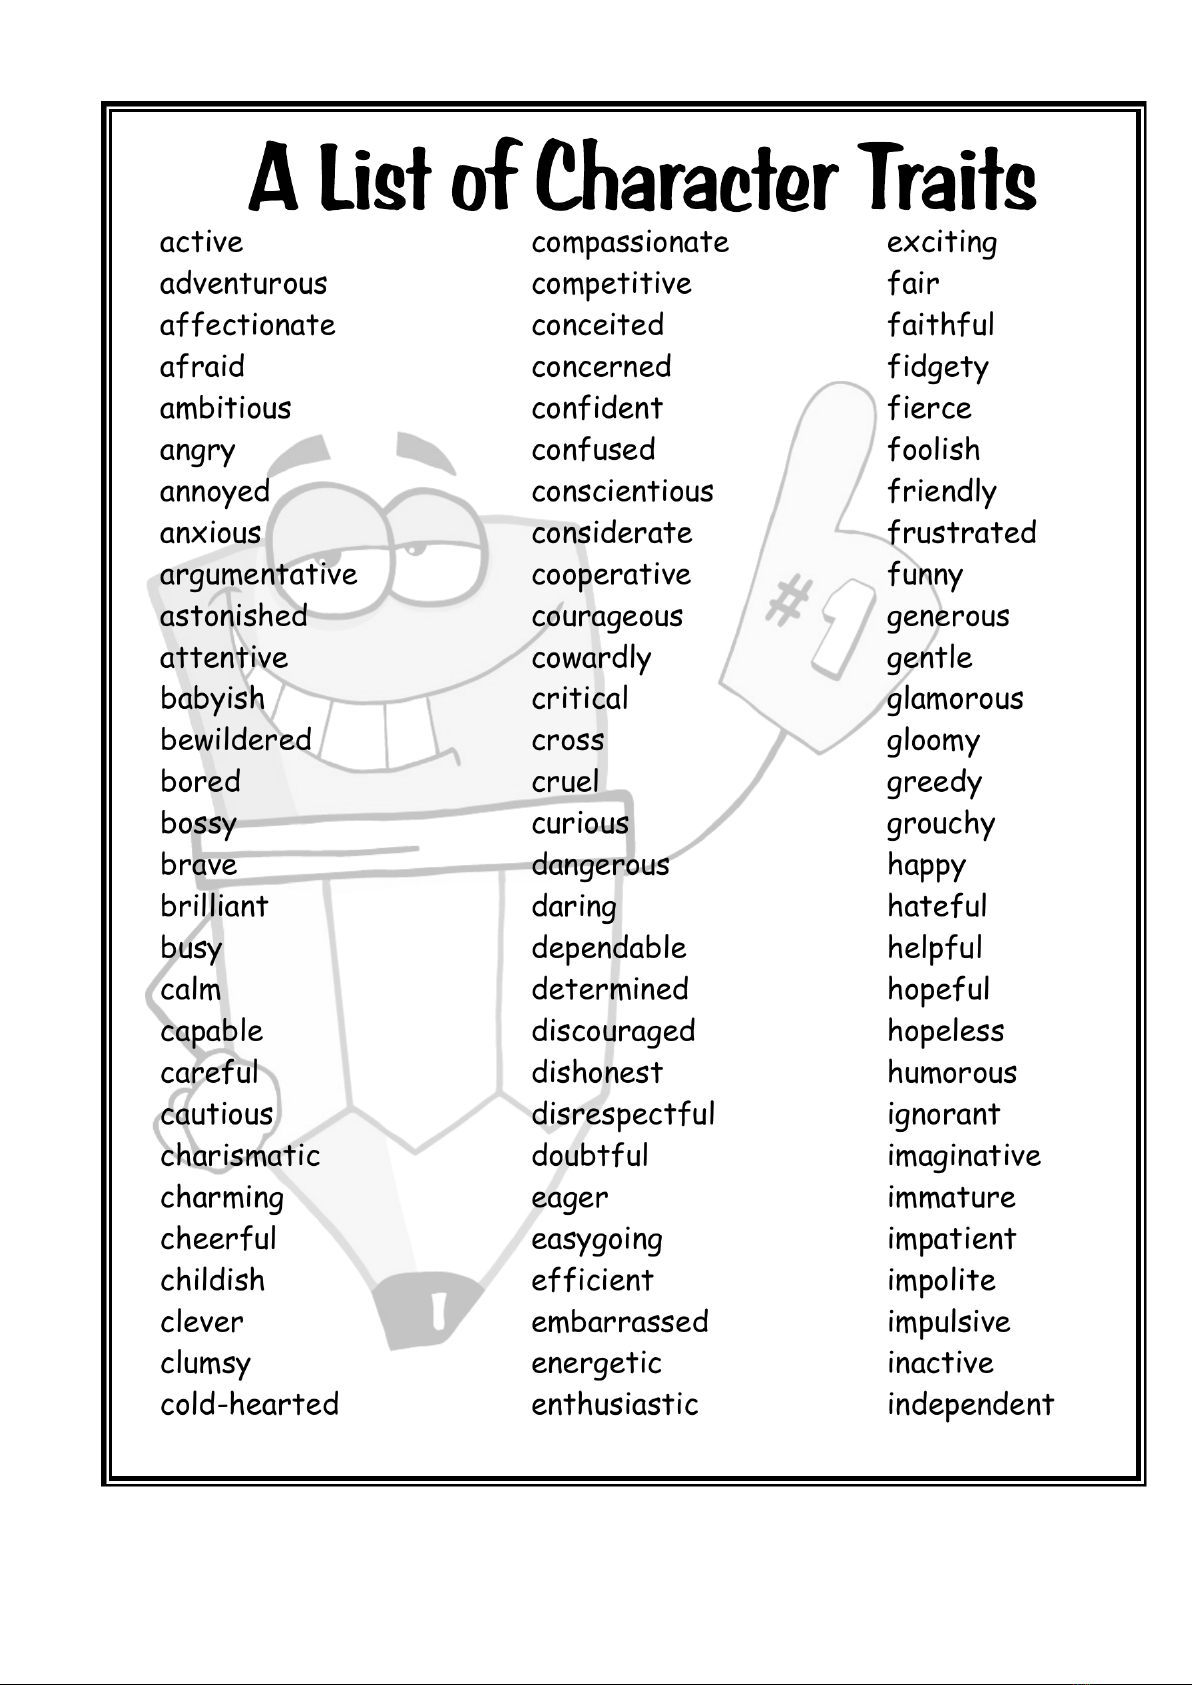 A List of Character Traits PDF Free Download - ncertlibrary.com